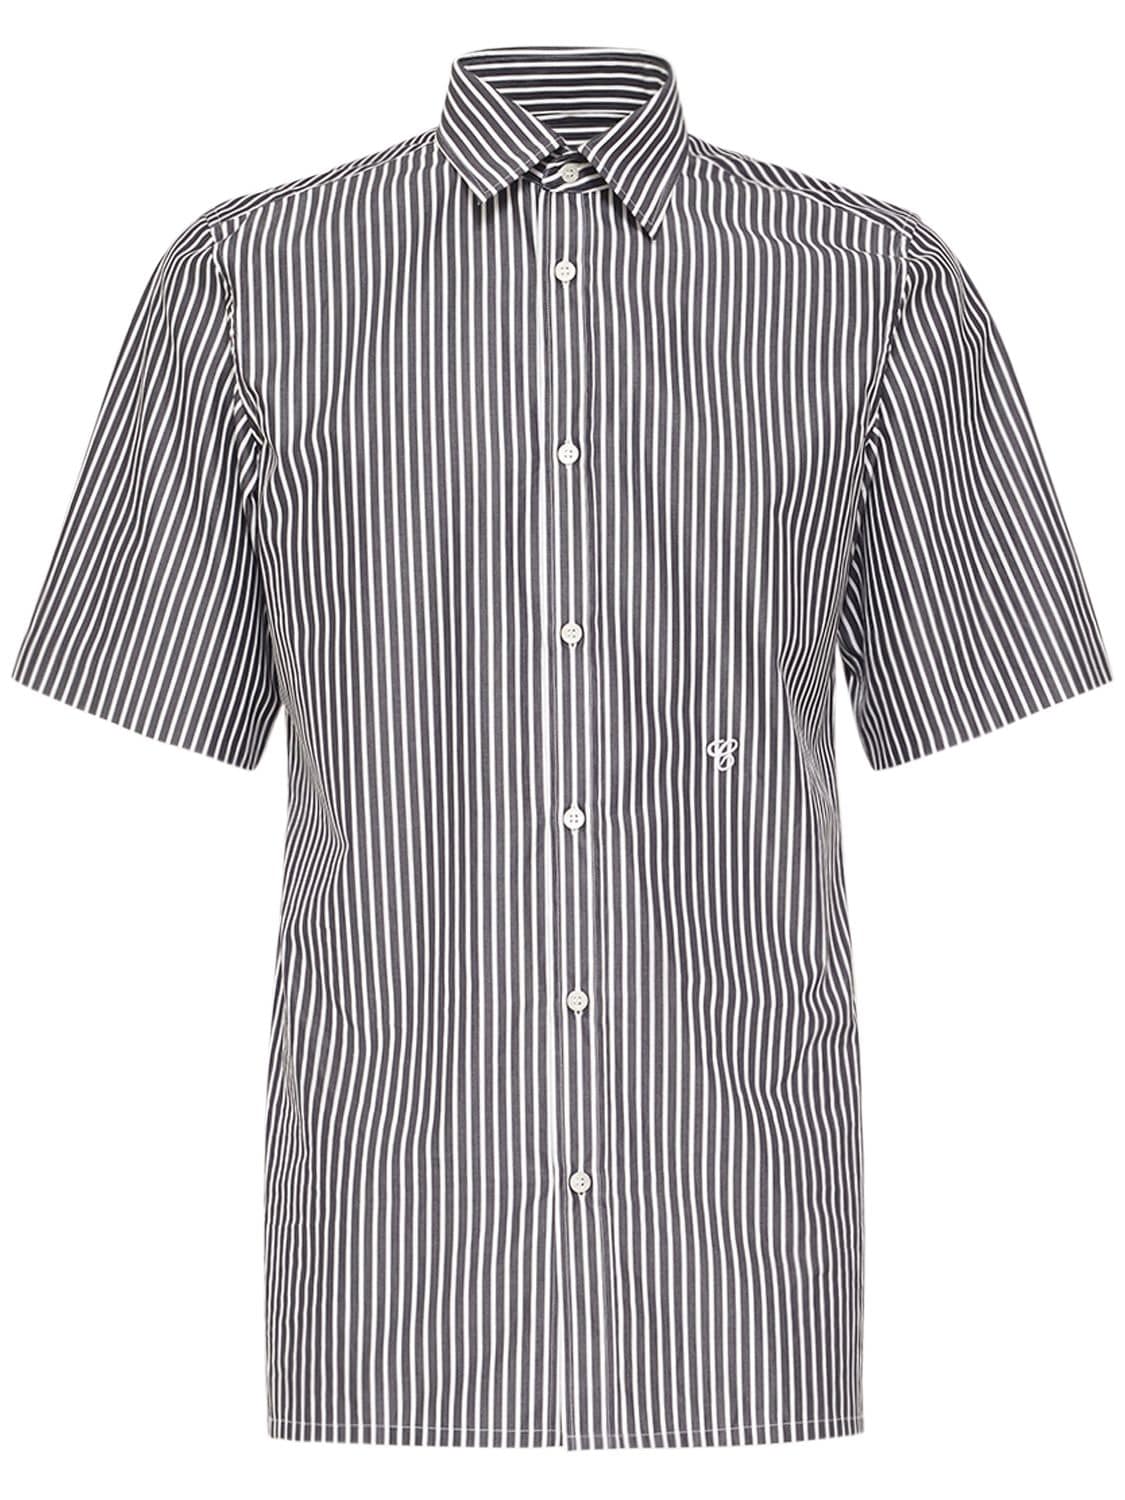 Image of Striped Cotton Short Sleeved Shirt